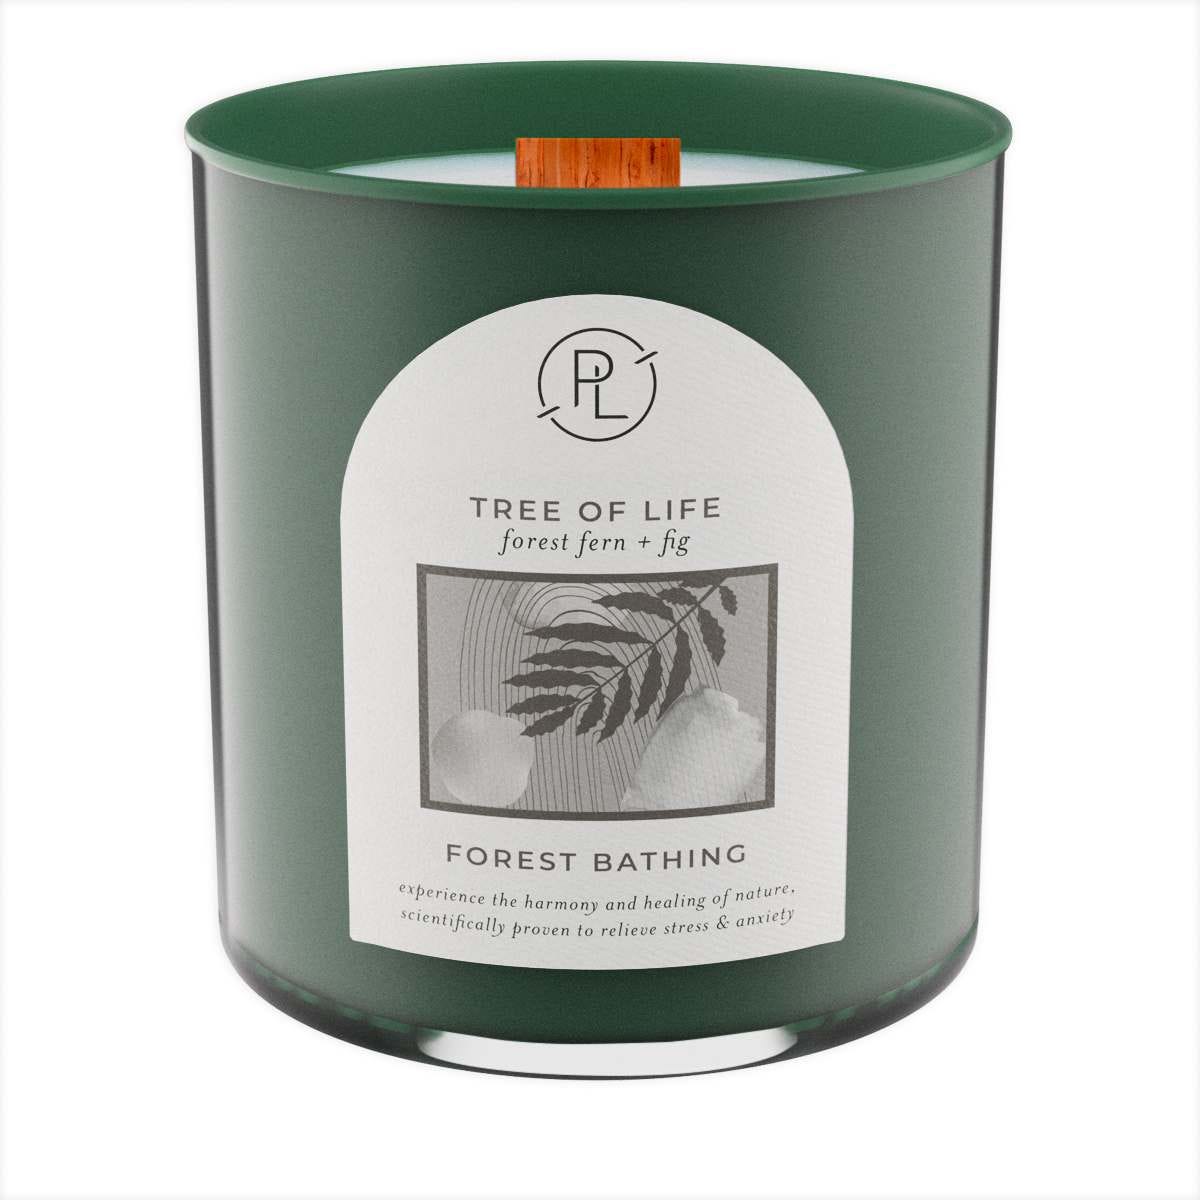 Tree of Life: forest fern + fig Jar Candle - PartyLite US